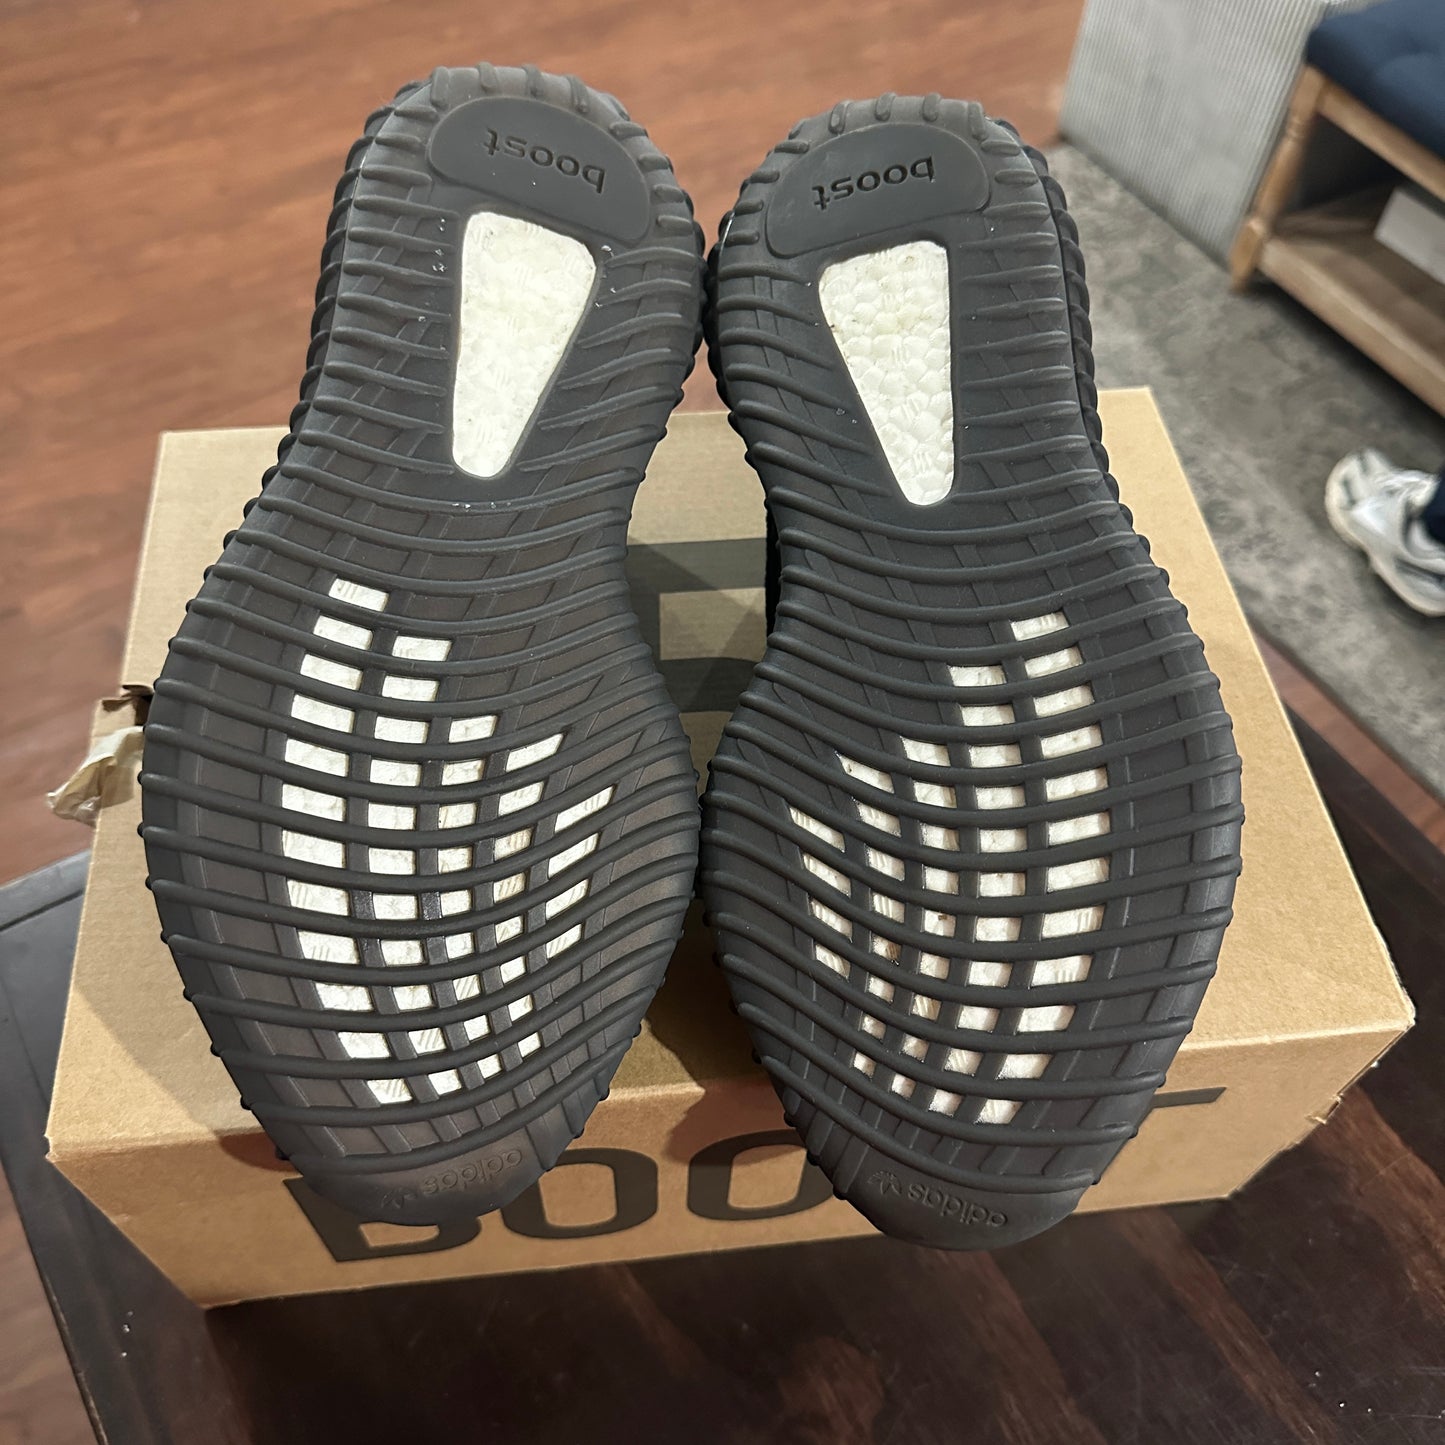 *USED* Yeezy Boost 350 v2 Core Black White 2016 (ALMOST NEW) size 9